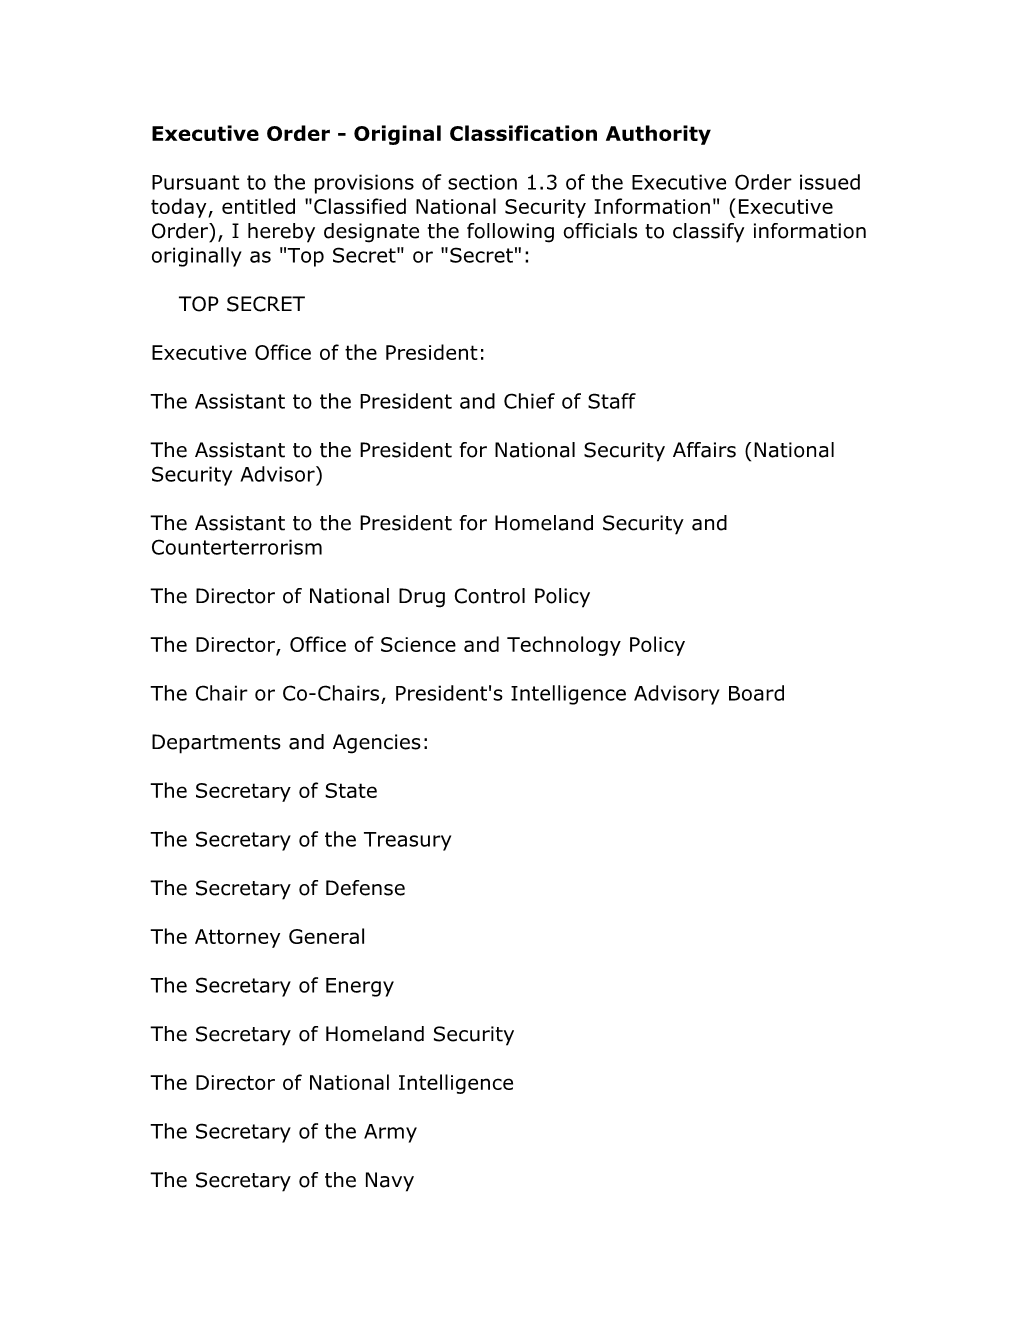 Executive Order - Classified National Security Information